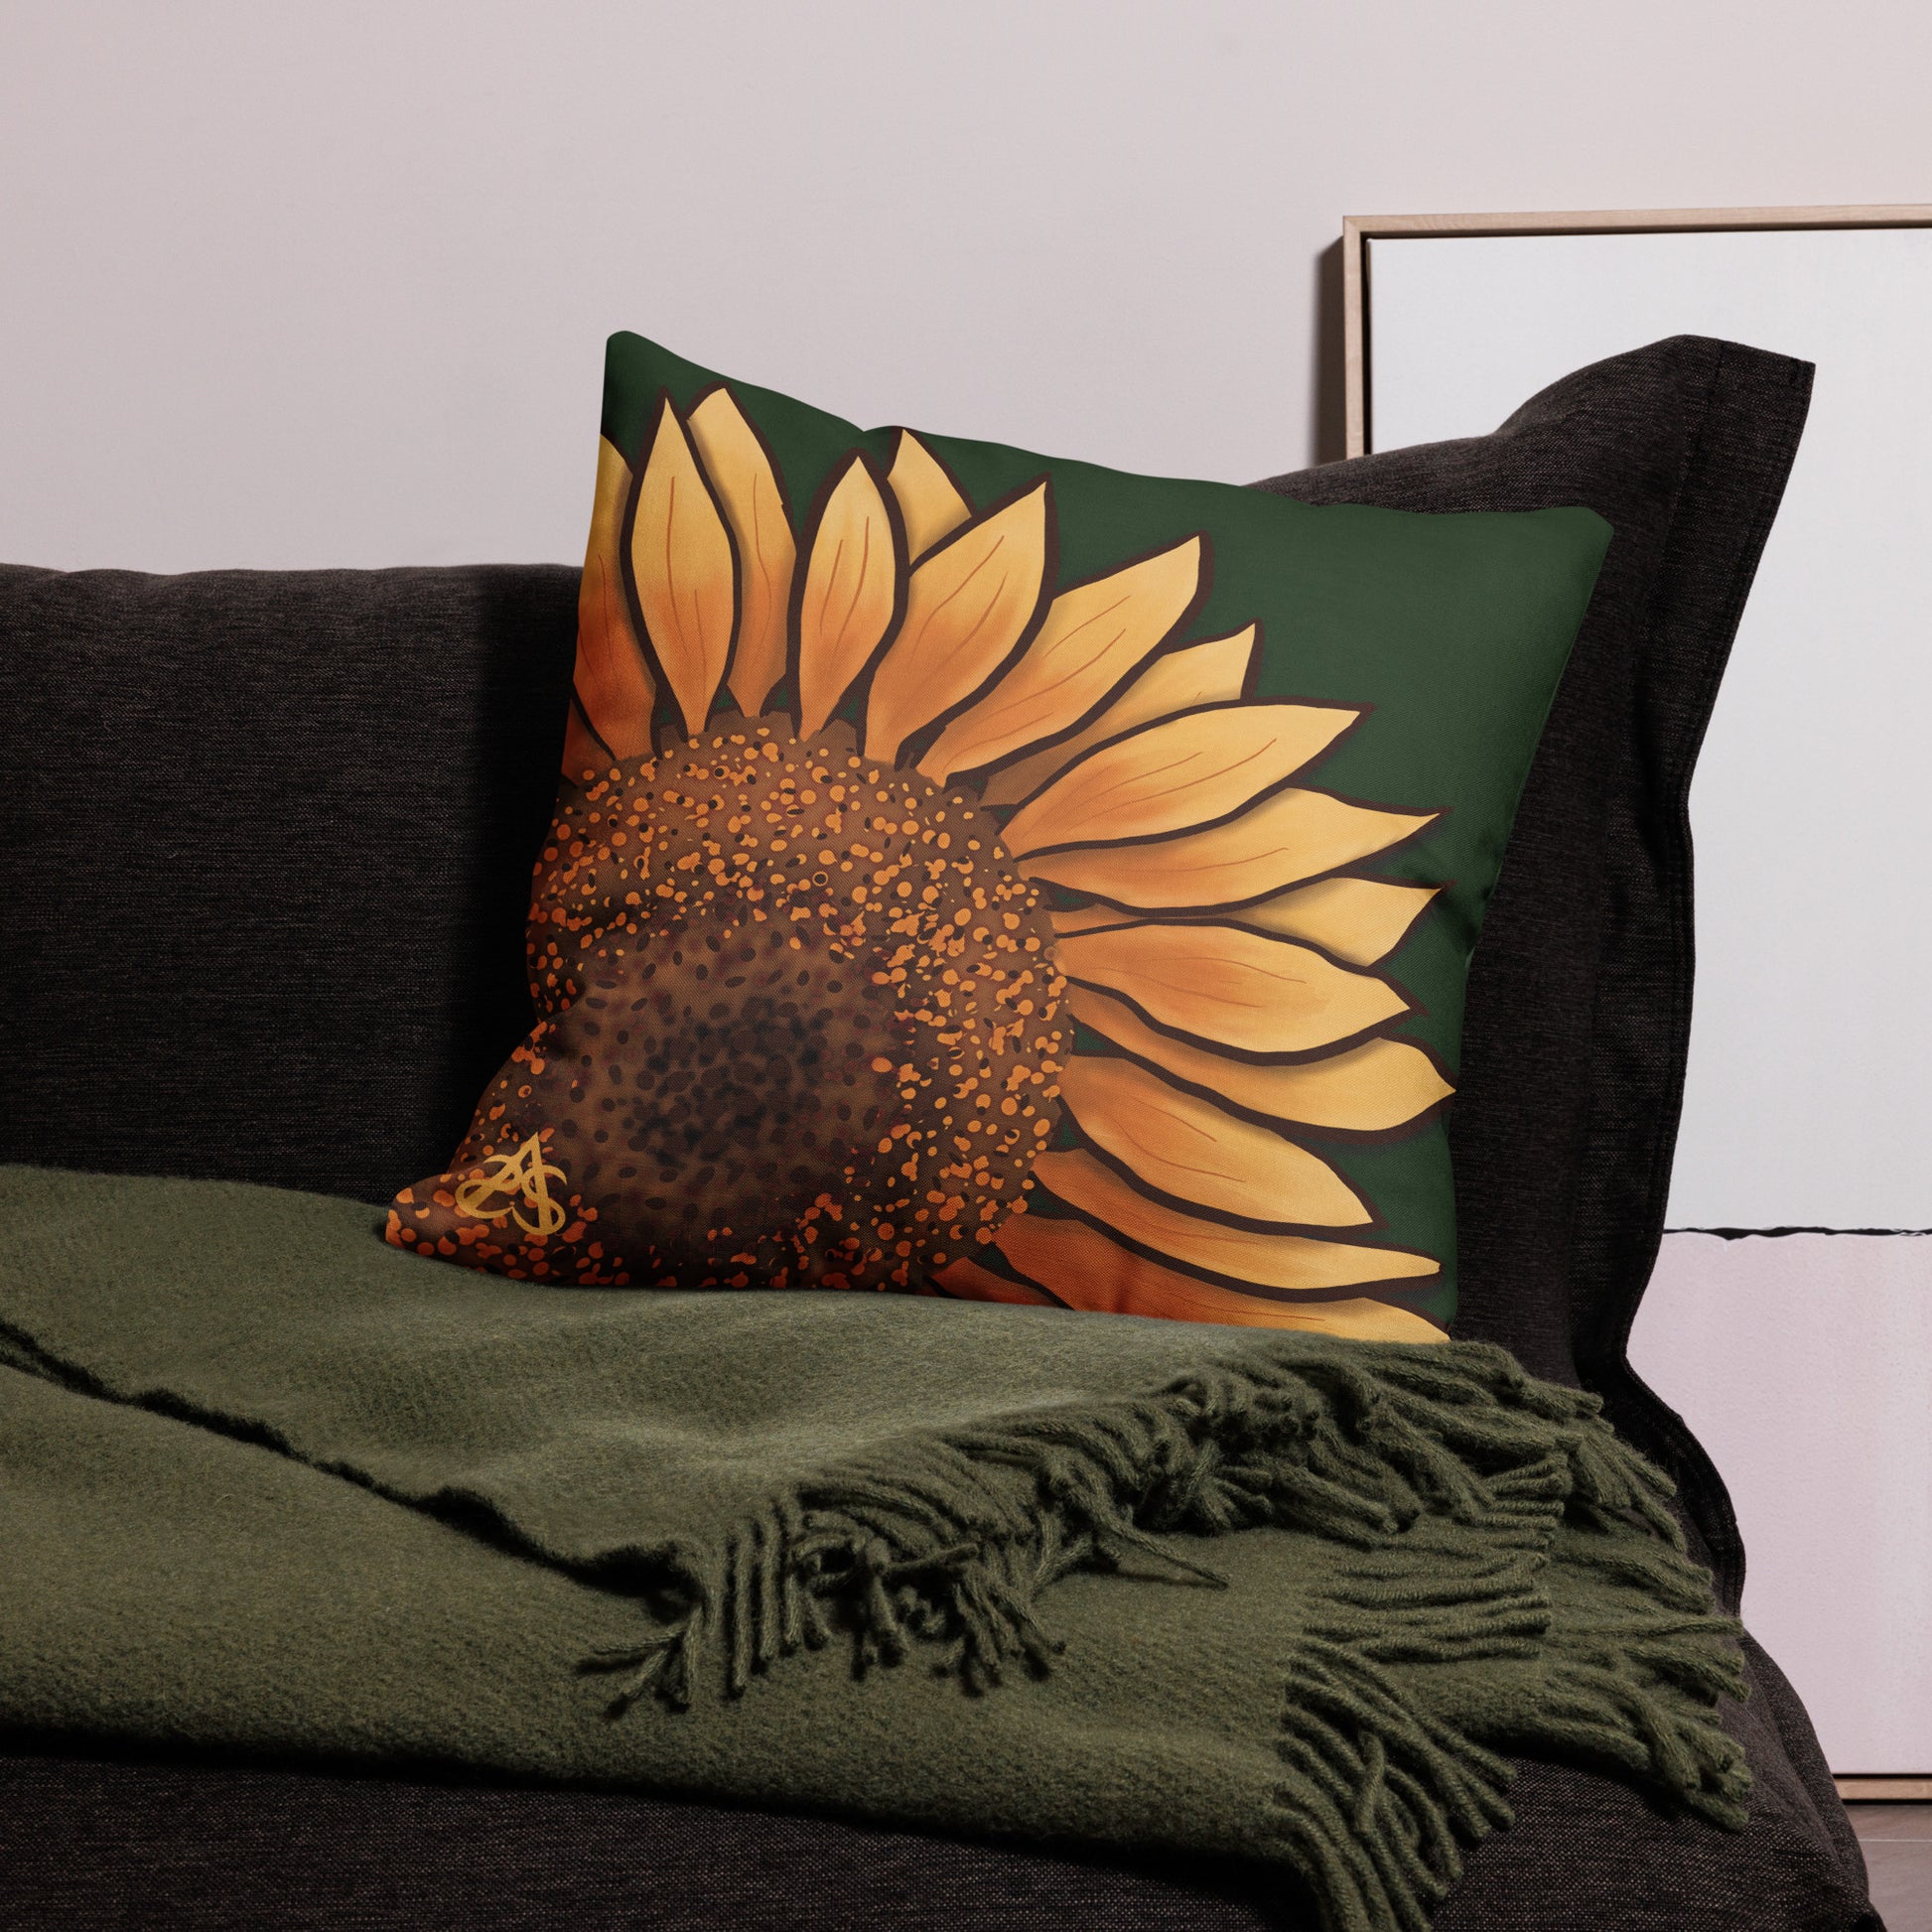 A large square pillow with a hand painted sunflower by Aras Sivad on a dark green background.